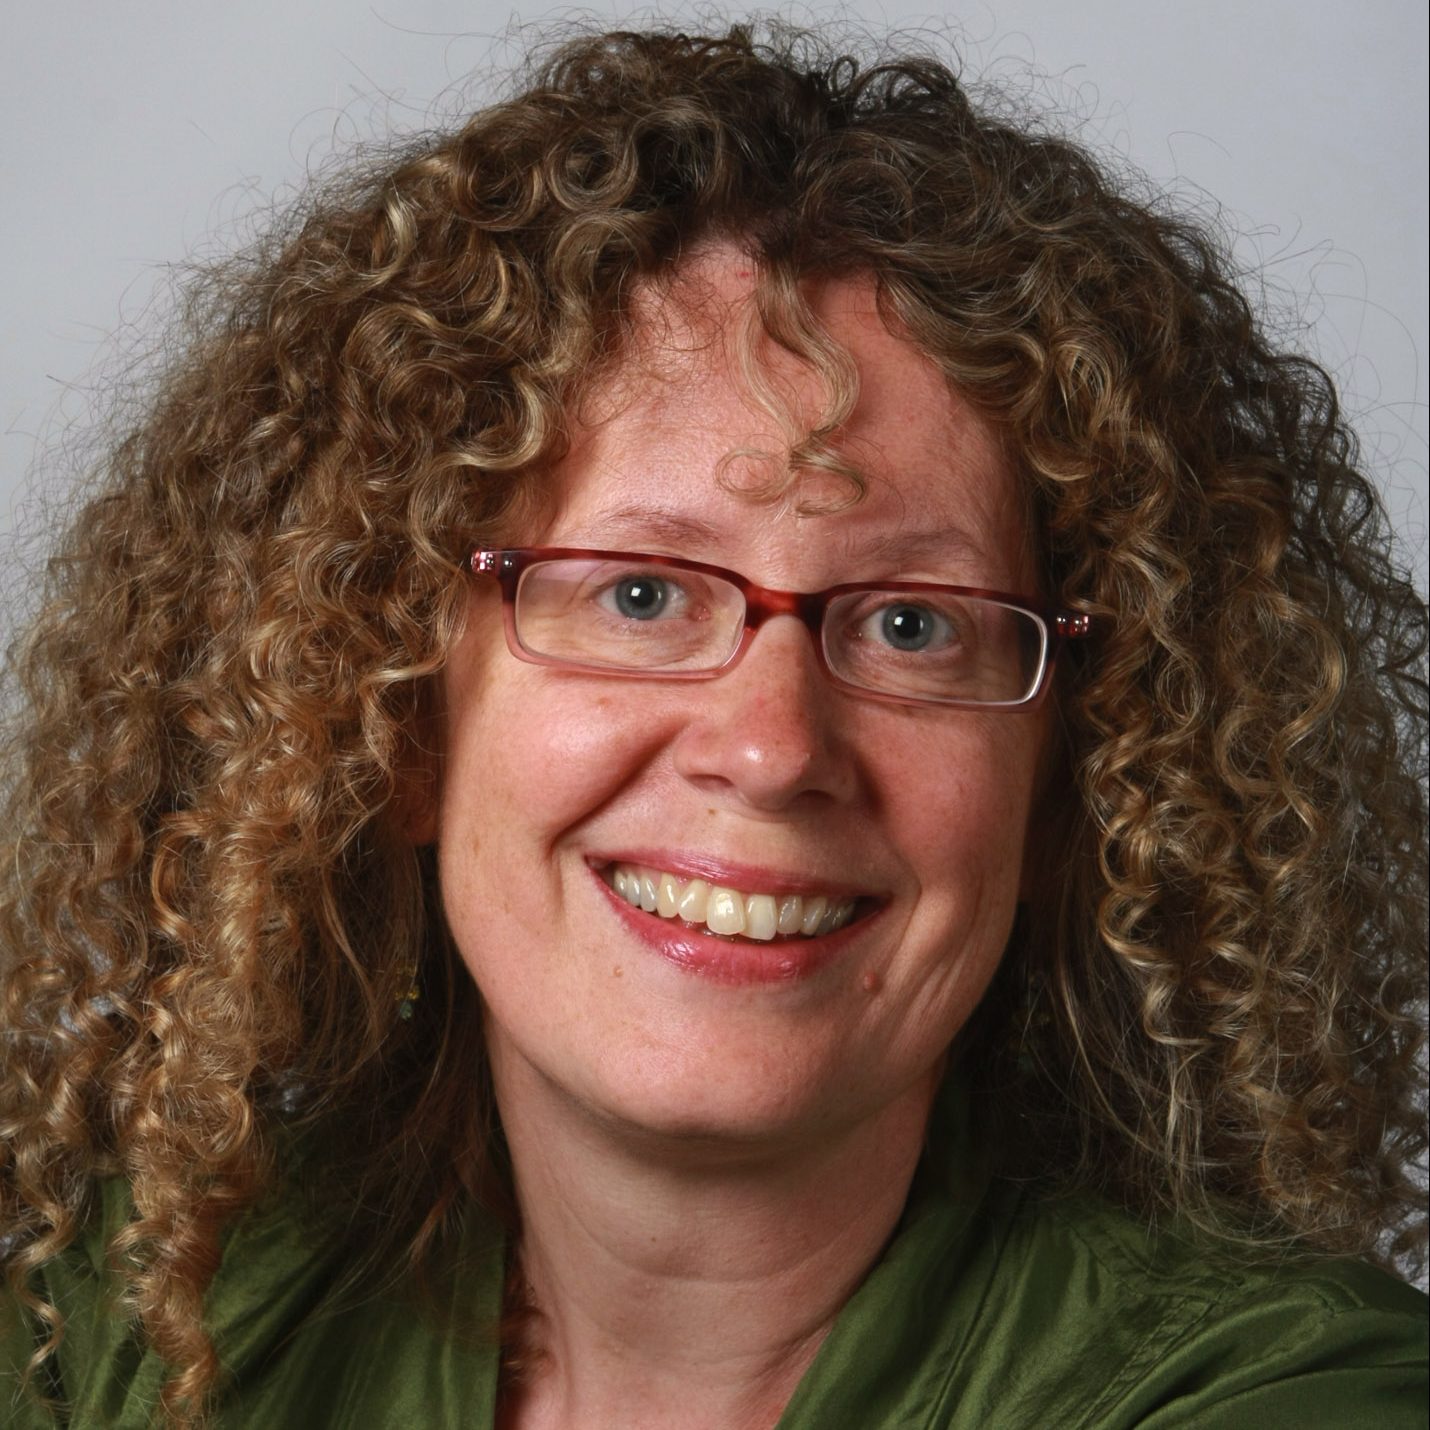 Laurie Hertzel, woman with curly hair and glasses